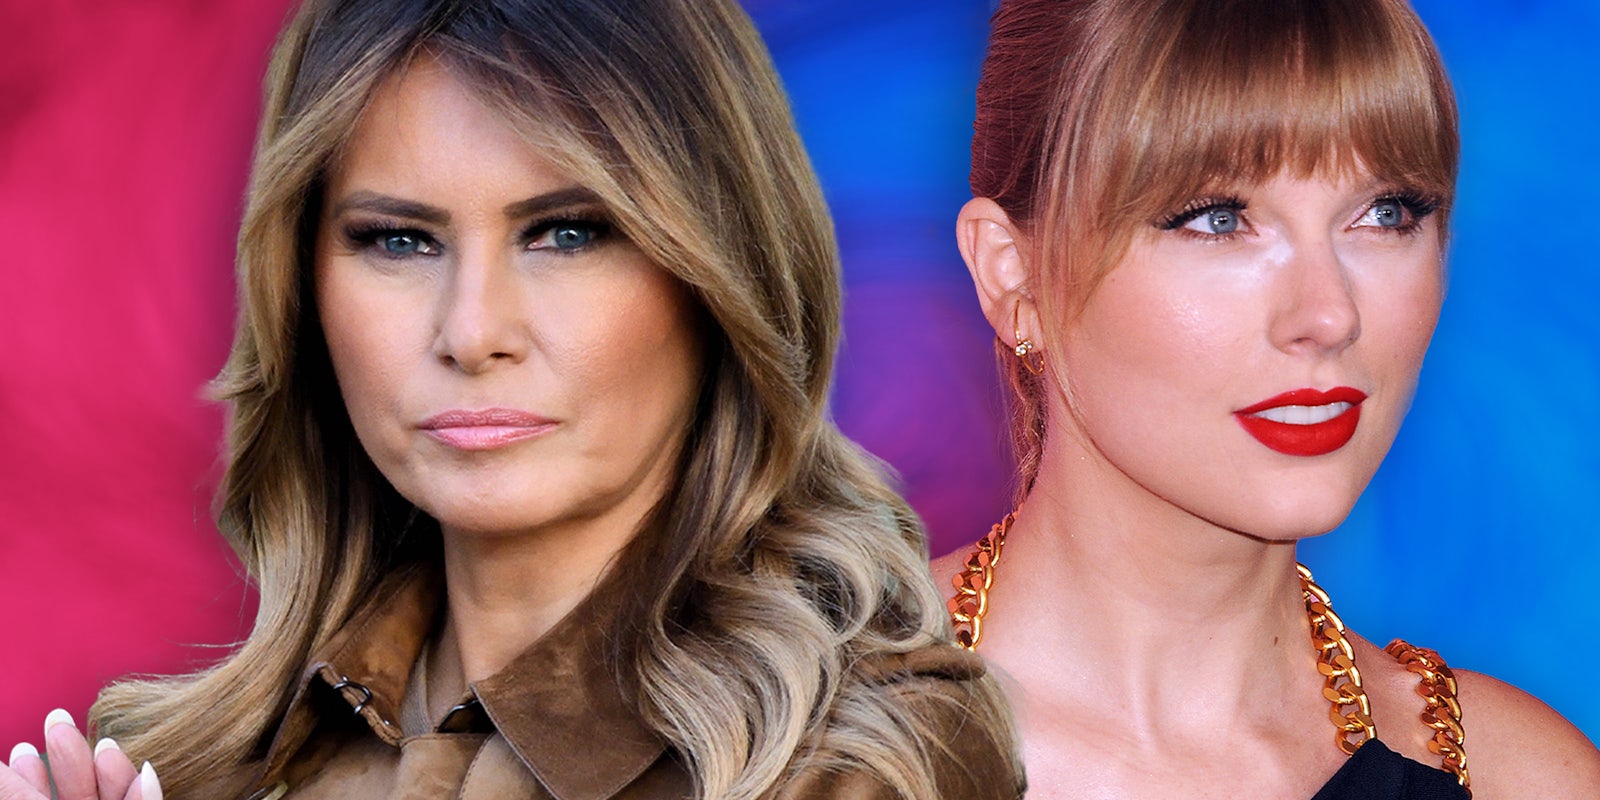 Trump fans say kids should look up to Melania, not Taylor Swift following Super Bowl